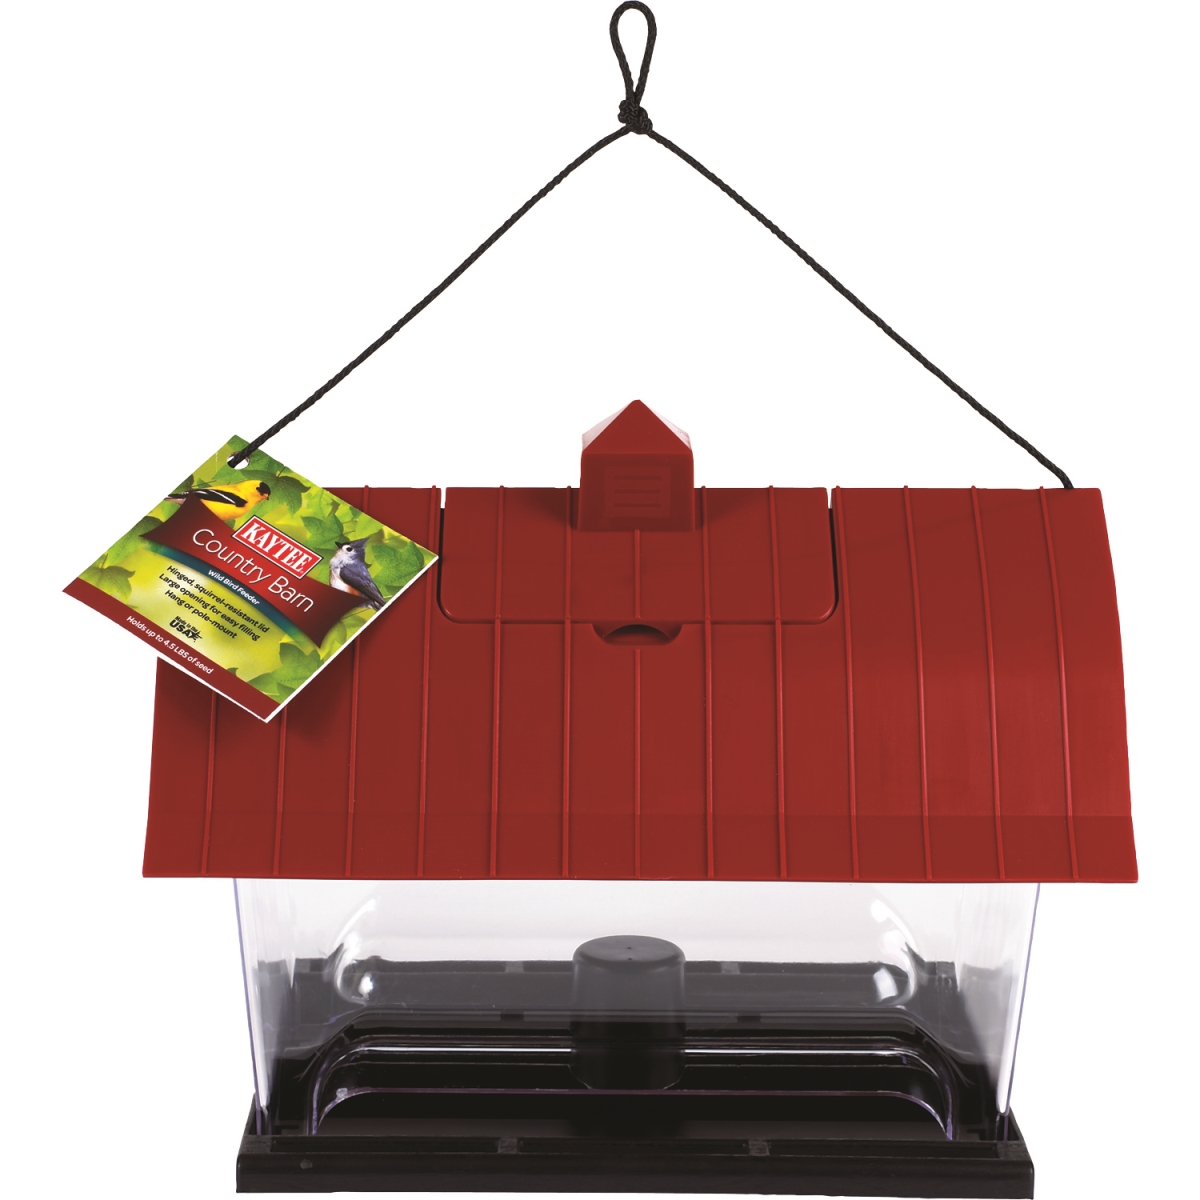 Kaytee Products Kt100506554 Country Barn Feeder